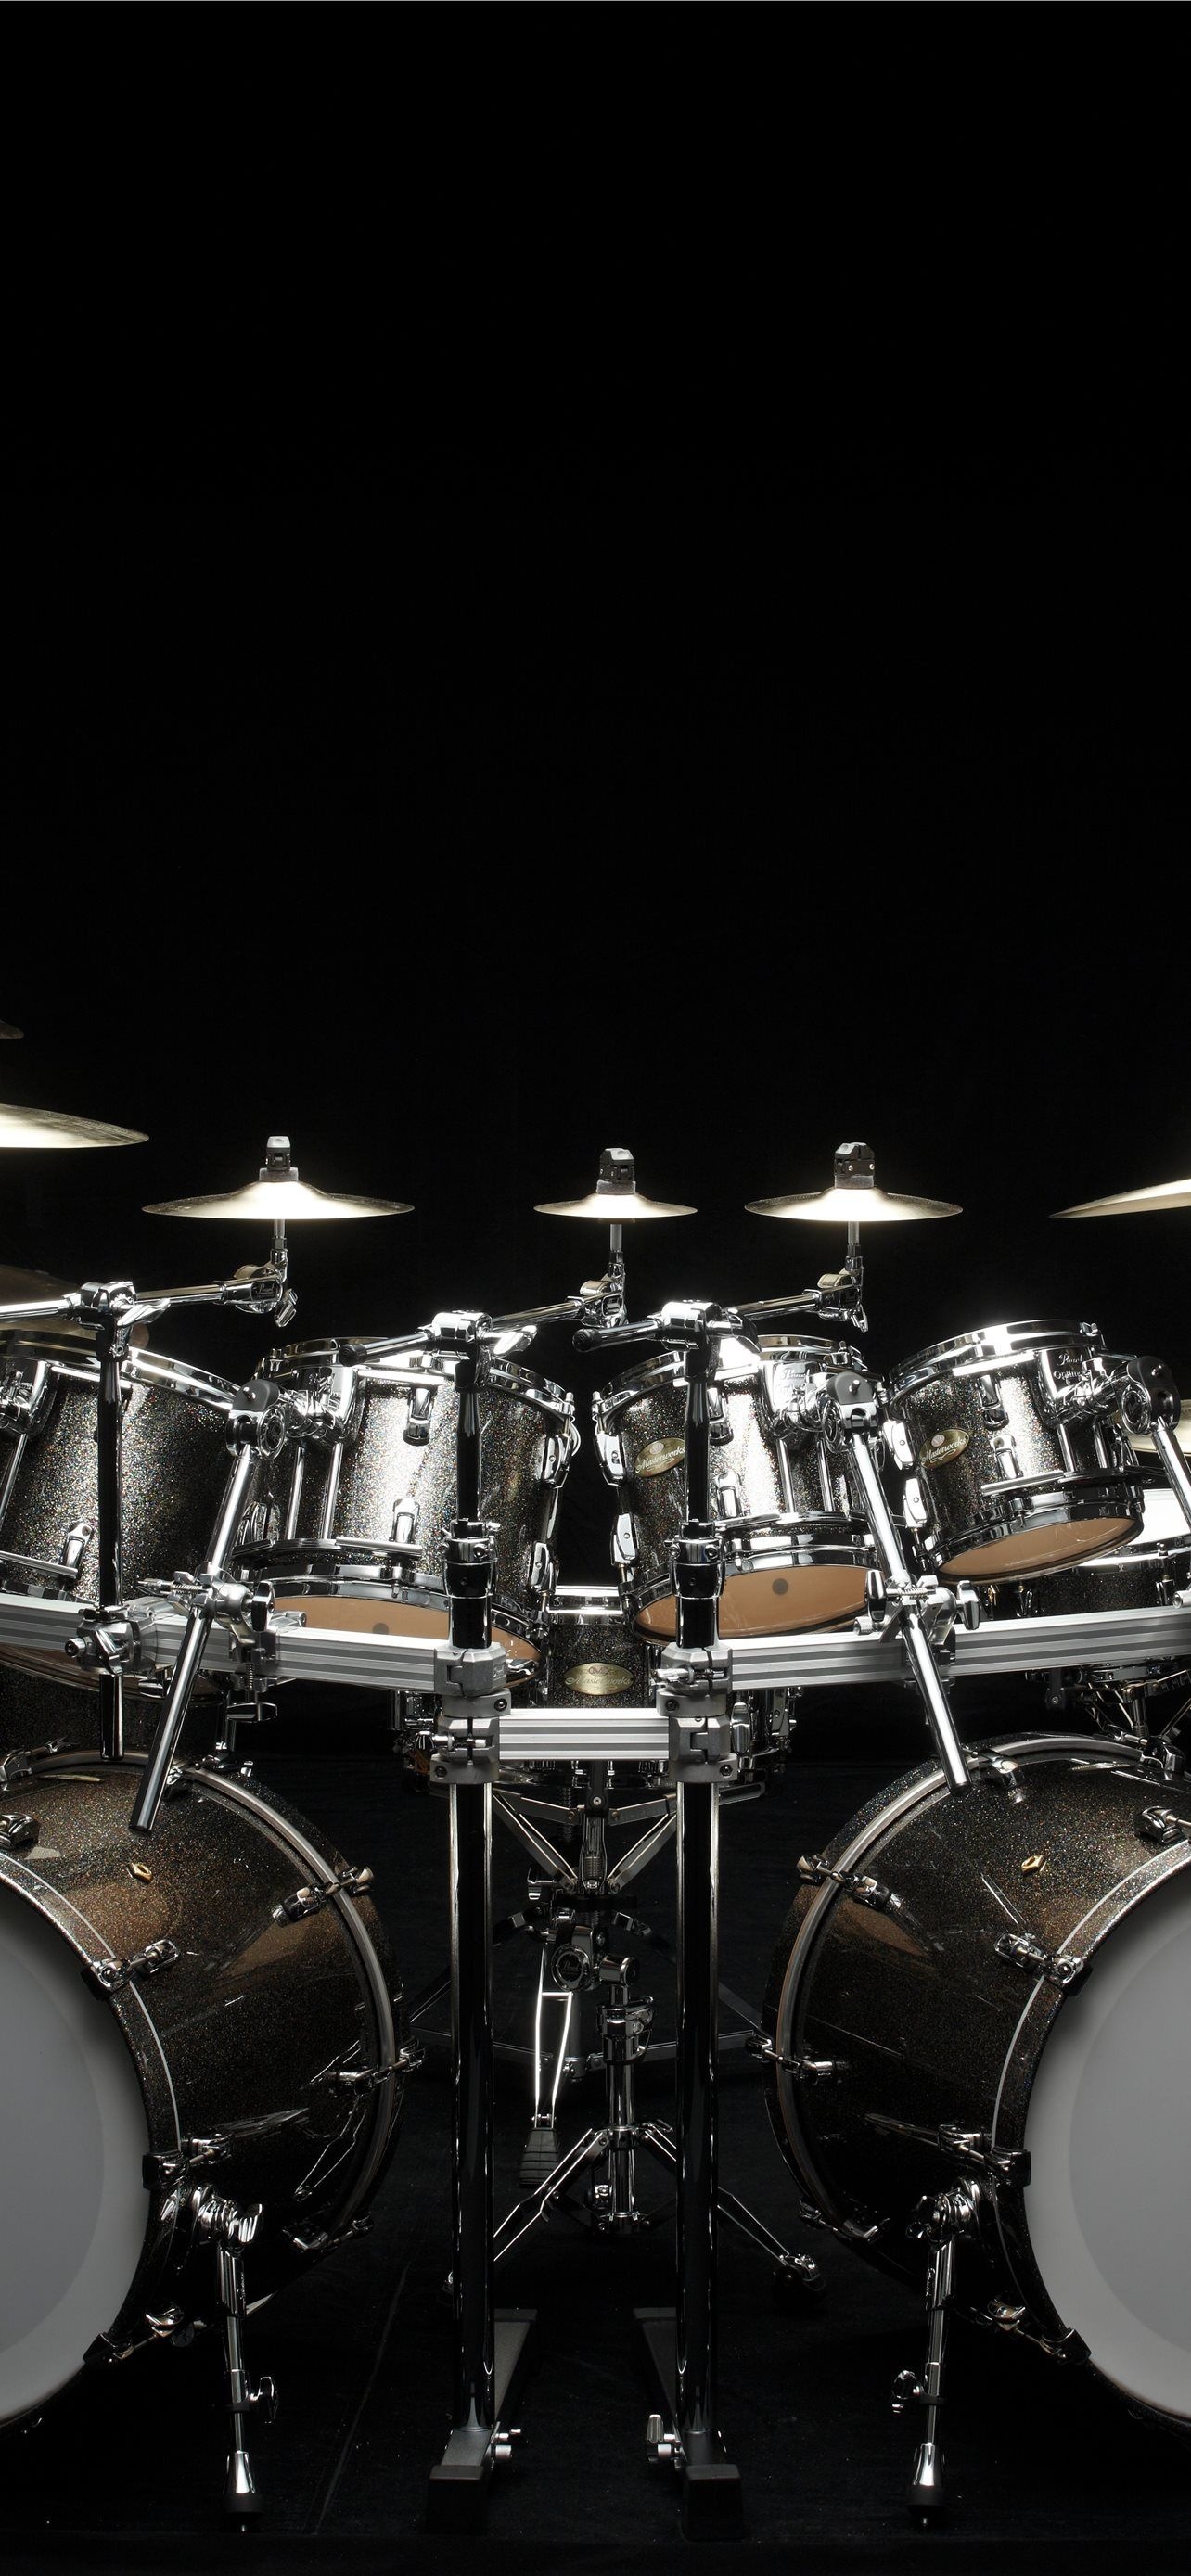 Drums: A Mix Of Drums, A Bass Drum, A Snare Drum, Toms, Hi-Hat, Cymbals. 1290x2780 HD Background.